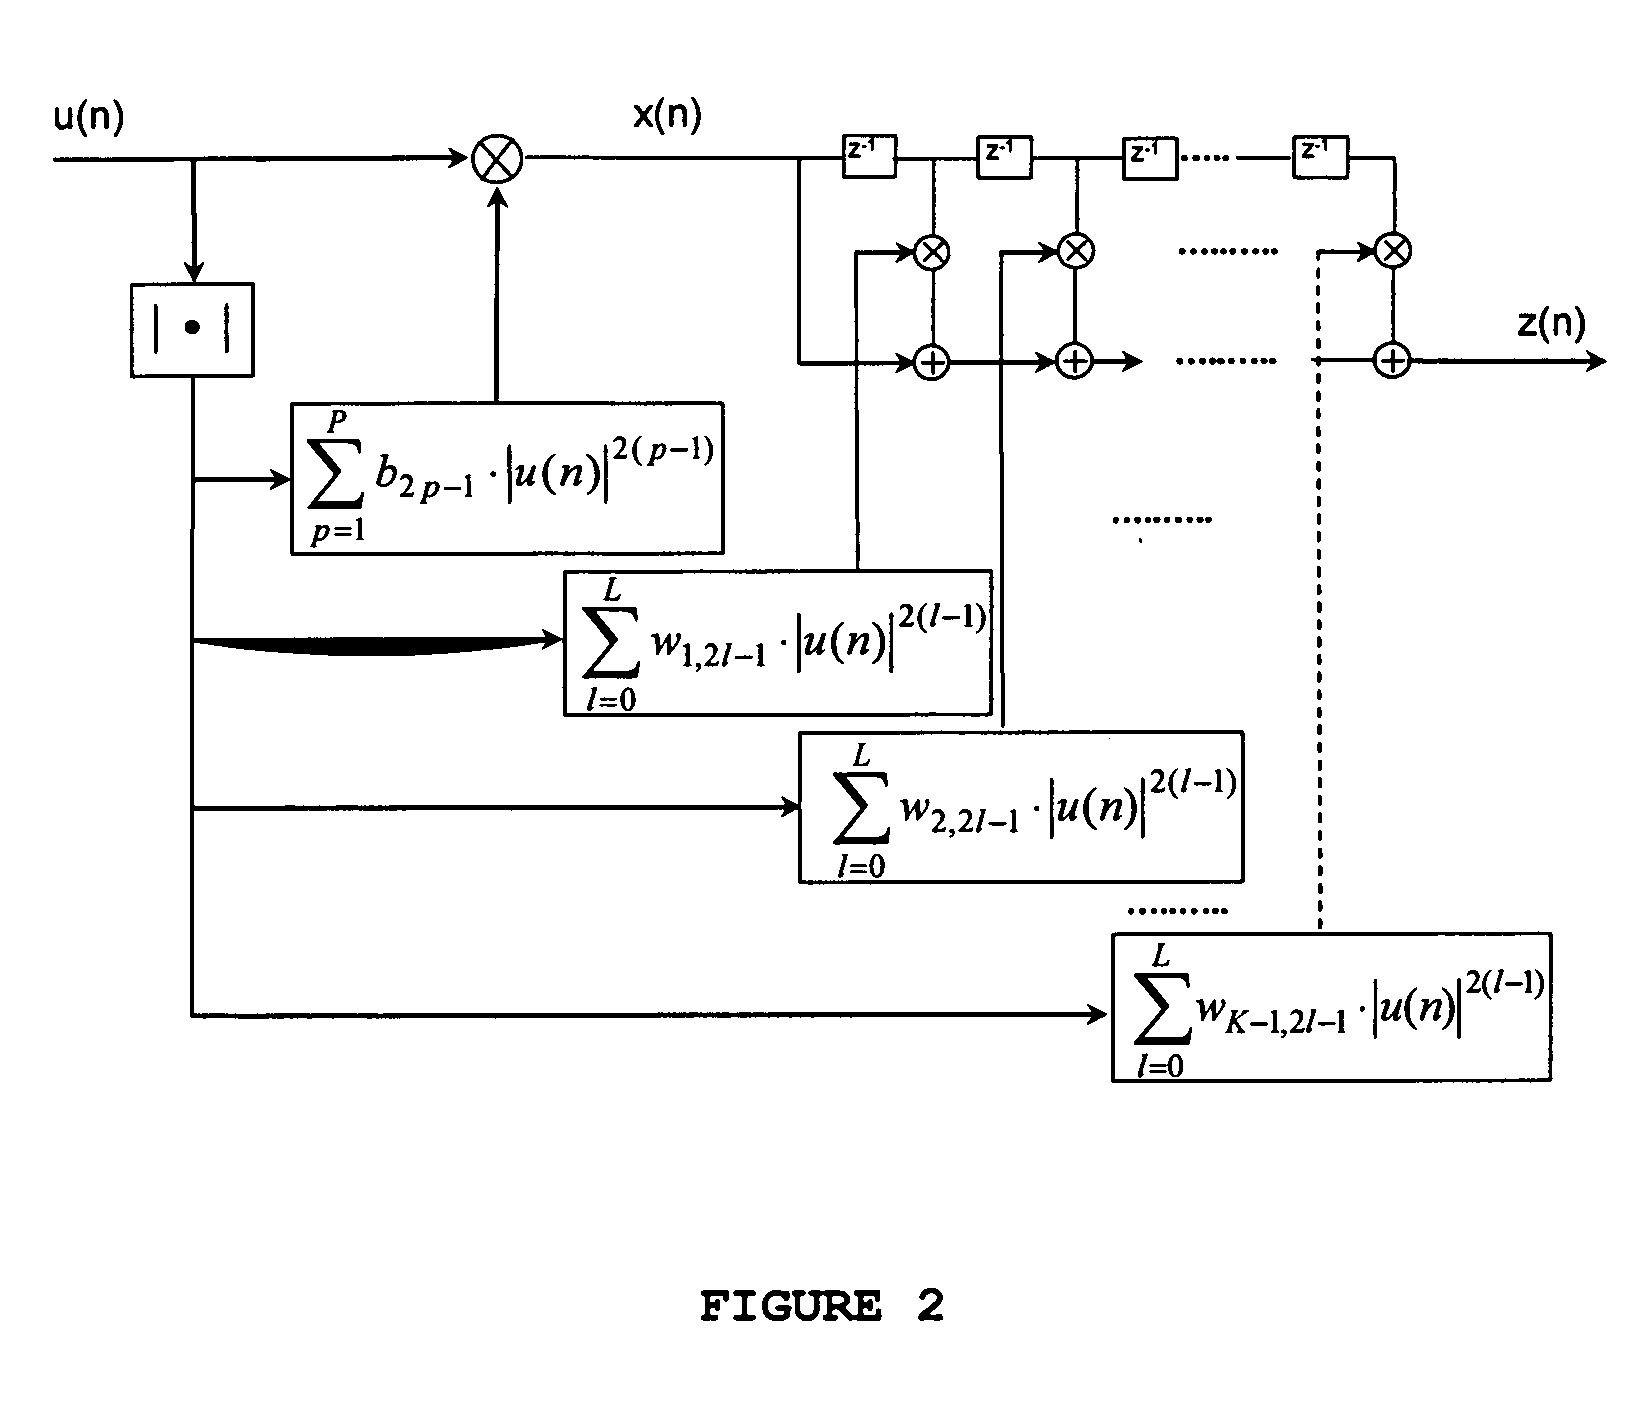 Method and System for Baseband Predistortion Linearization in Multi-Channel Wideband Communication Systems